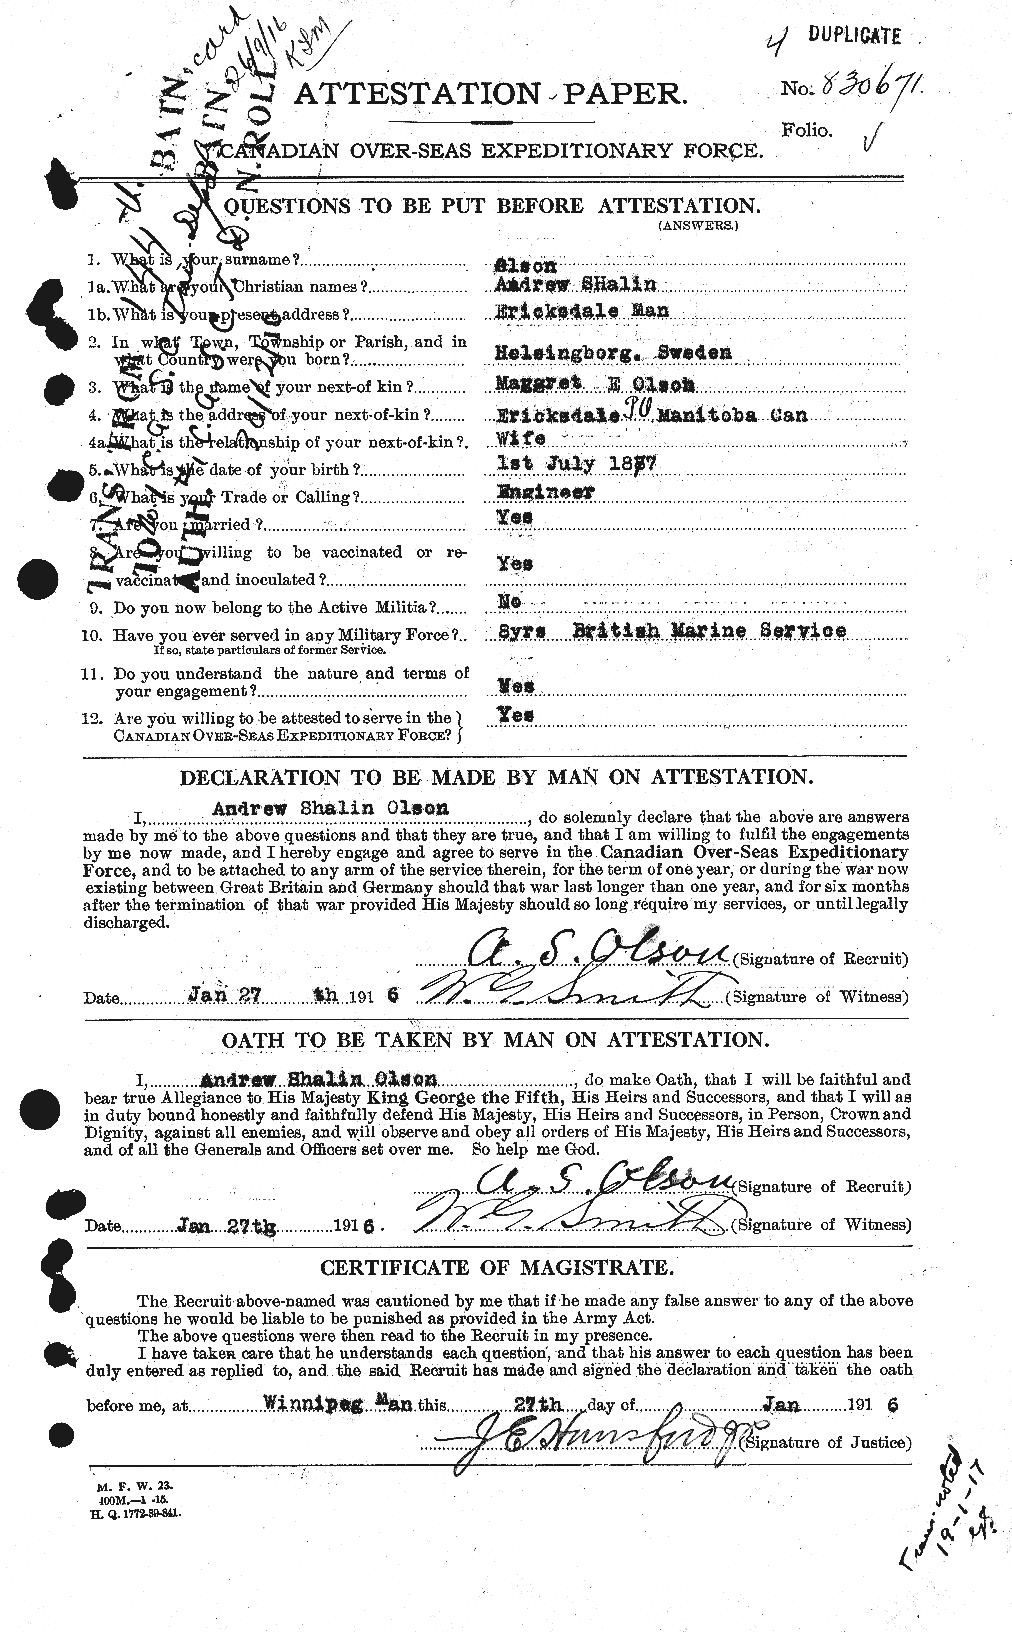 Personnel Records of the First World War - CEF 557140a